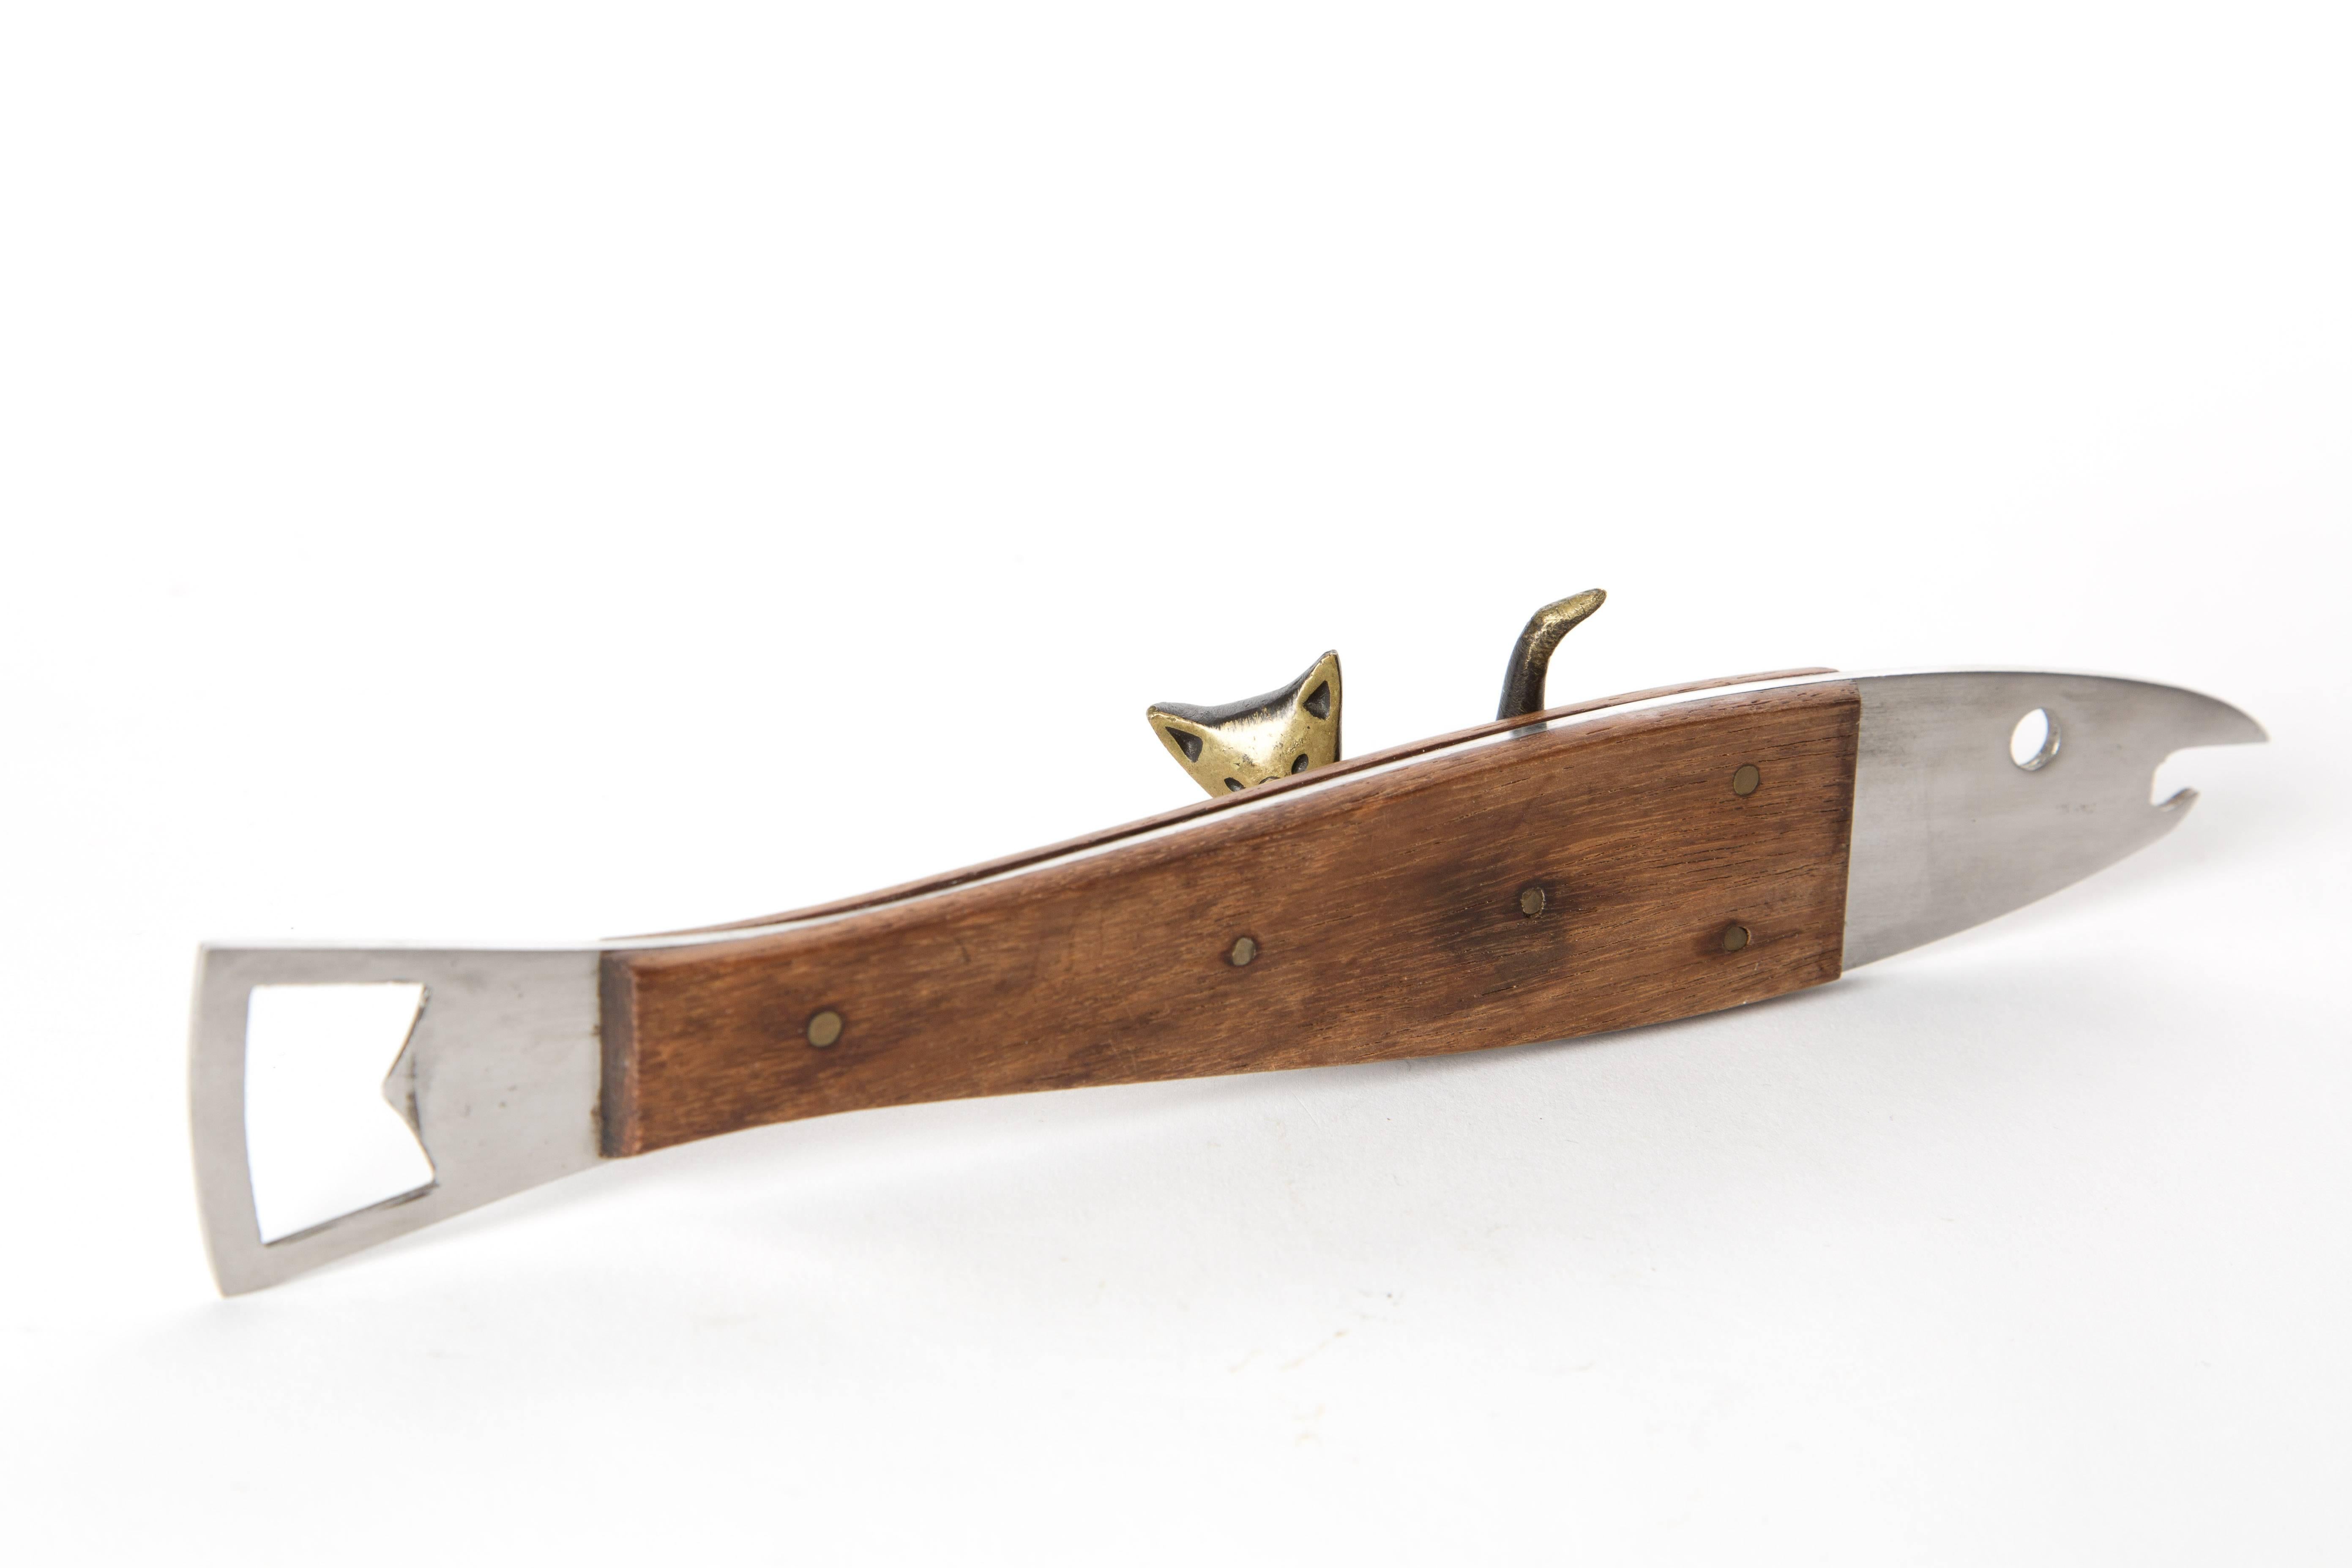 Carl Aubock style. Bottle opener as a fish. With stainless steel and wood.
The original version is published in the book Carl Auböck, the workshop, Clemens Kois. 